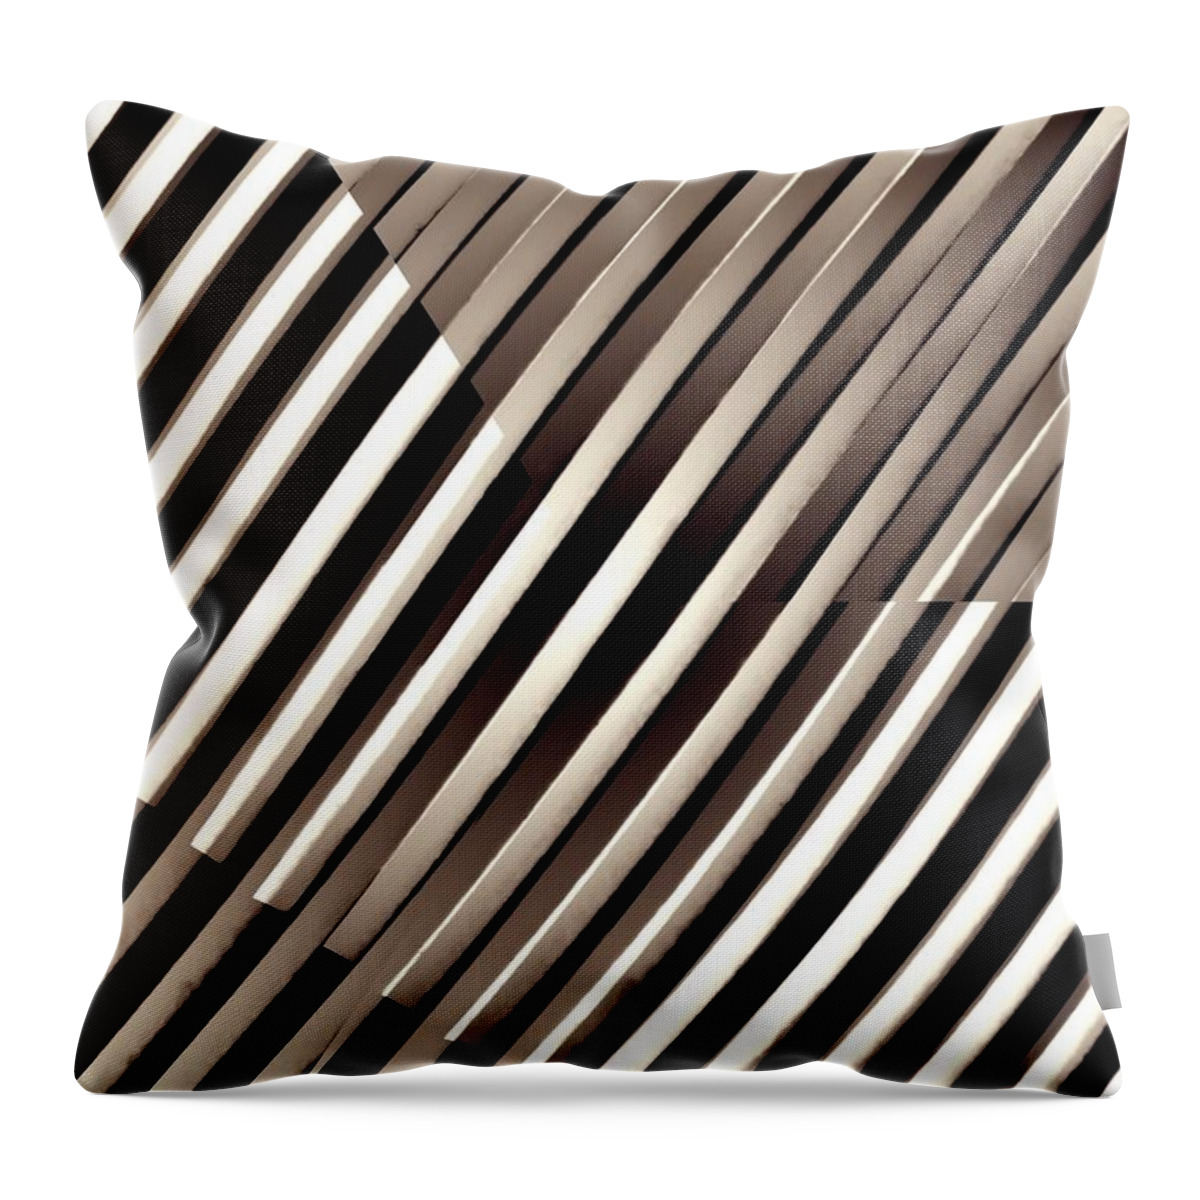 Parallel Lines Throw Pillow featuring the digital art Illusion in Sepia by Sarah Loft